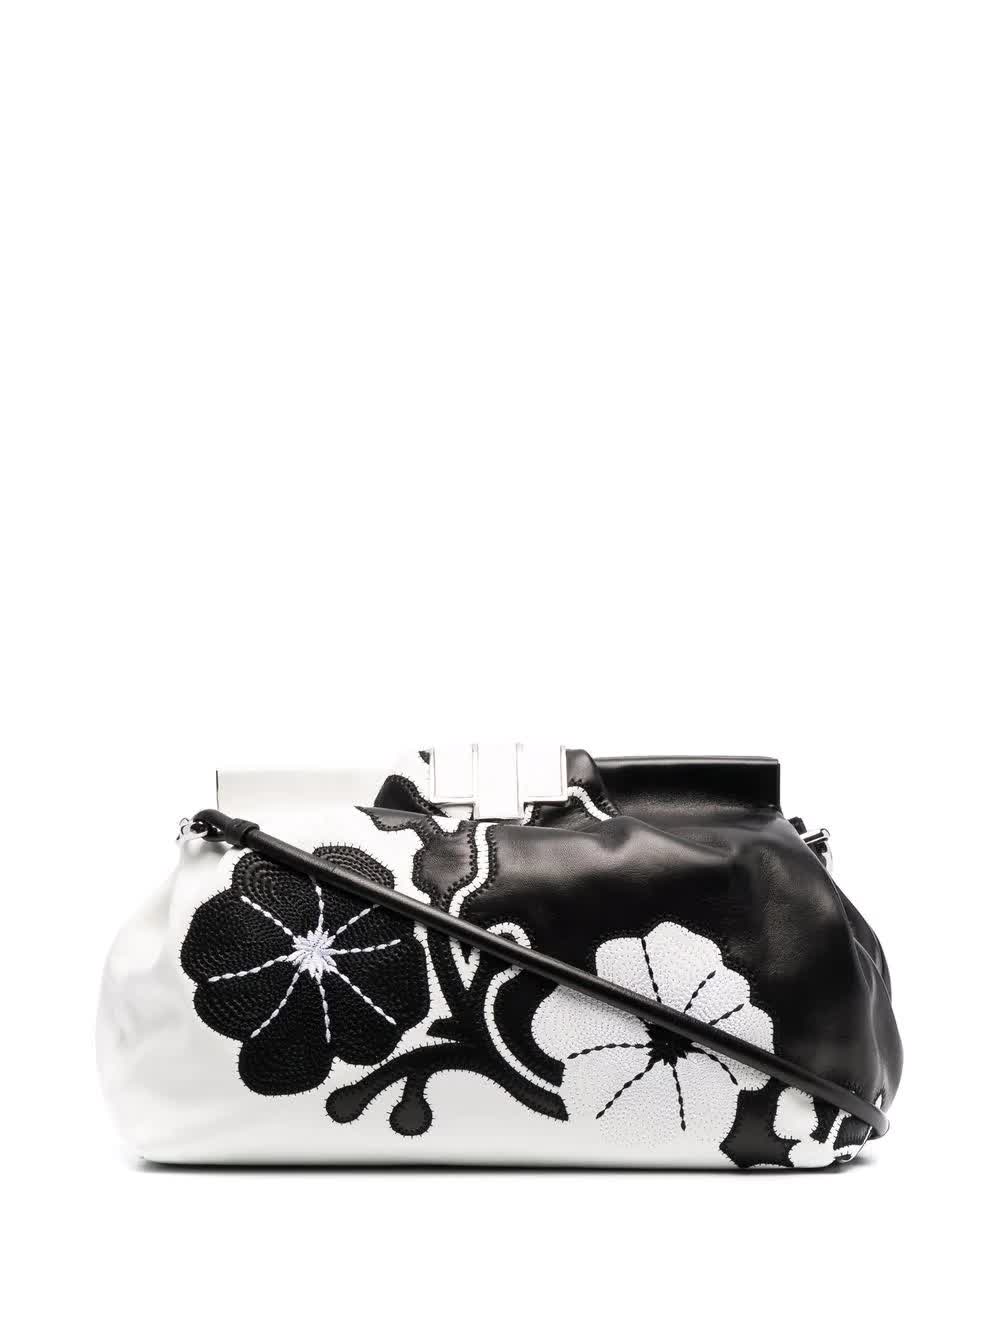 Ermanno Scervino Black And Ivory Medium Clutch With Embroidered Floral Inlays